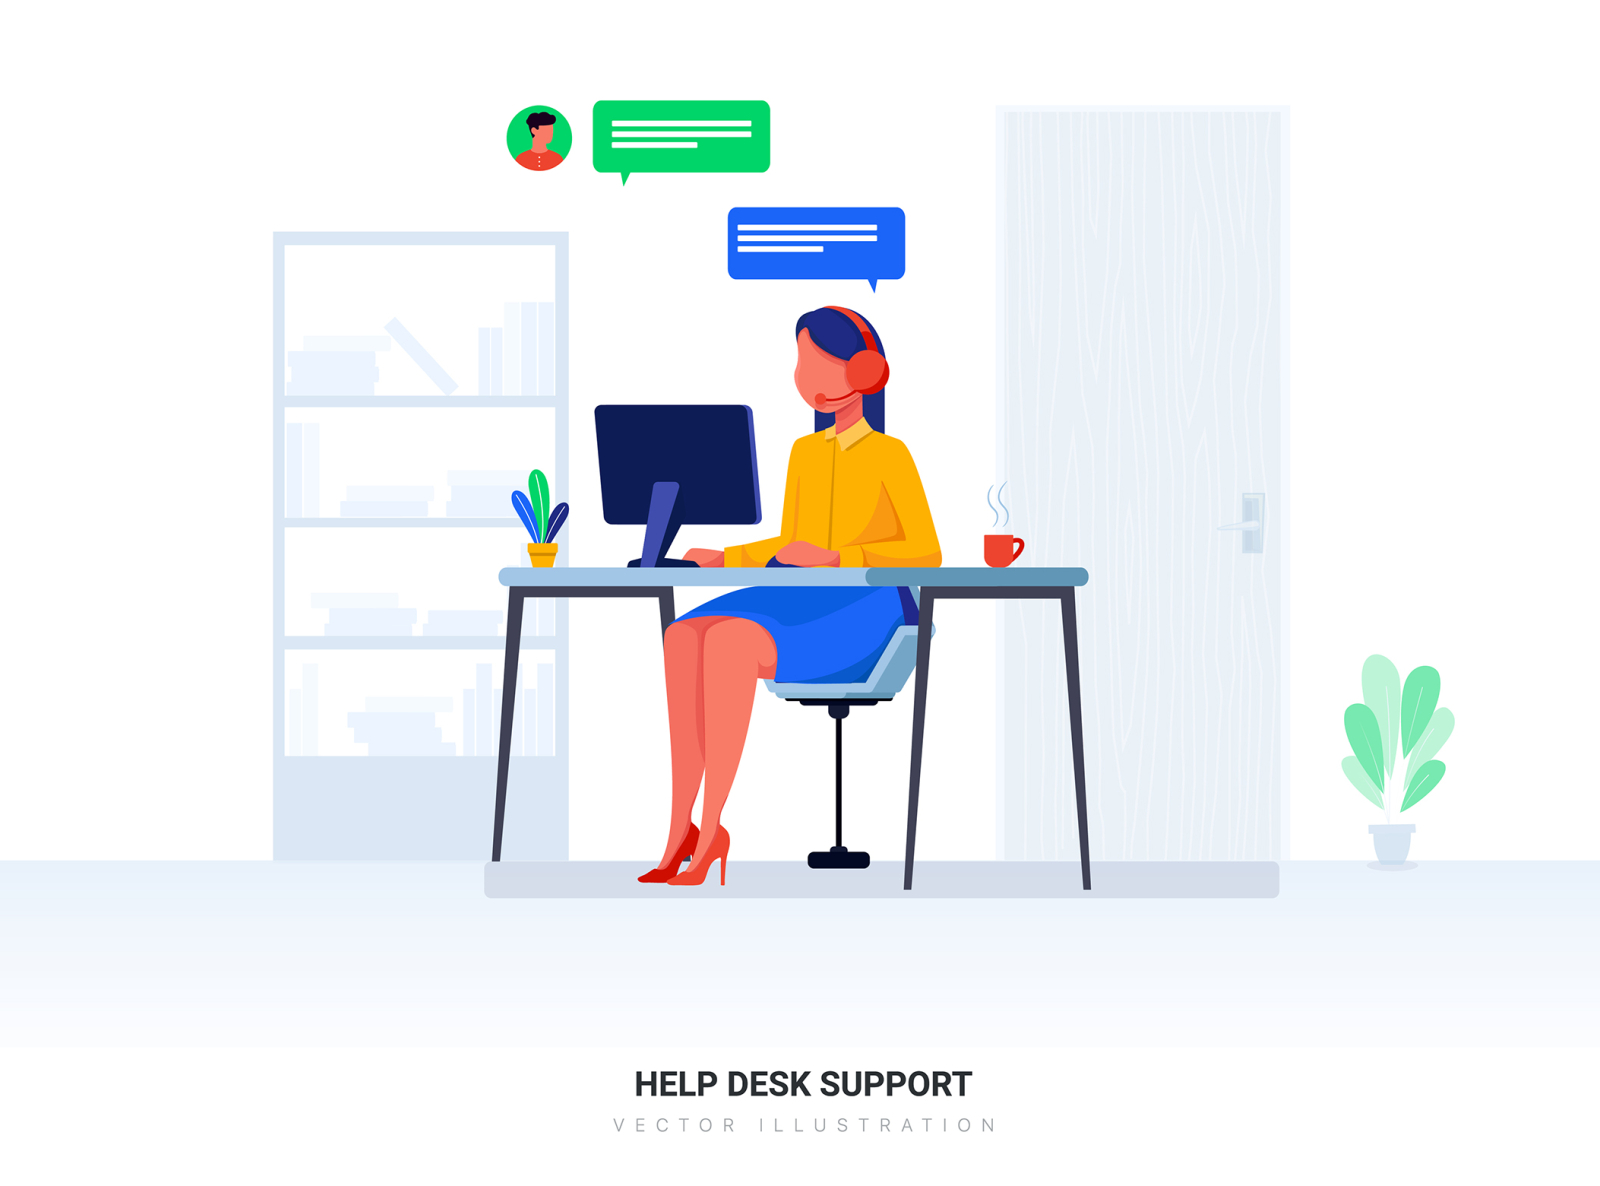 Help Desk Support Vector Illustration By Hoangpts On Dribbble